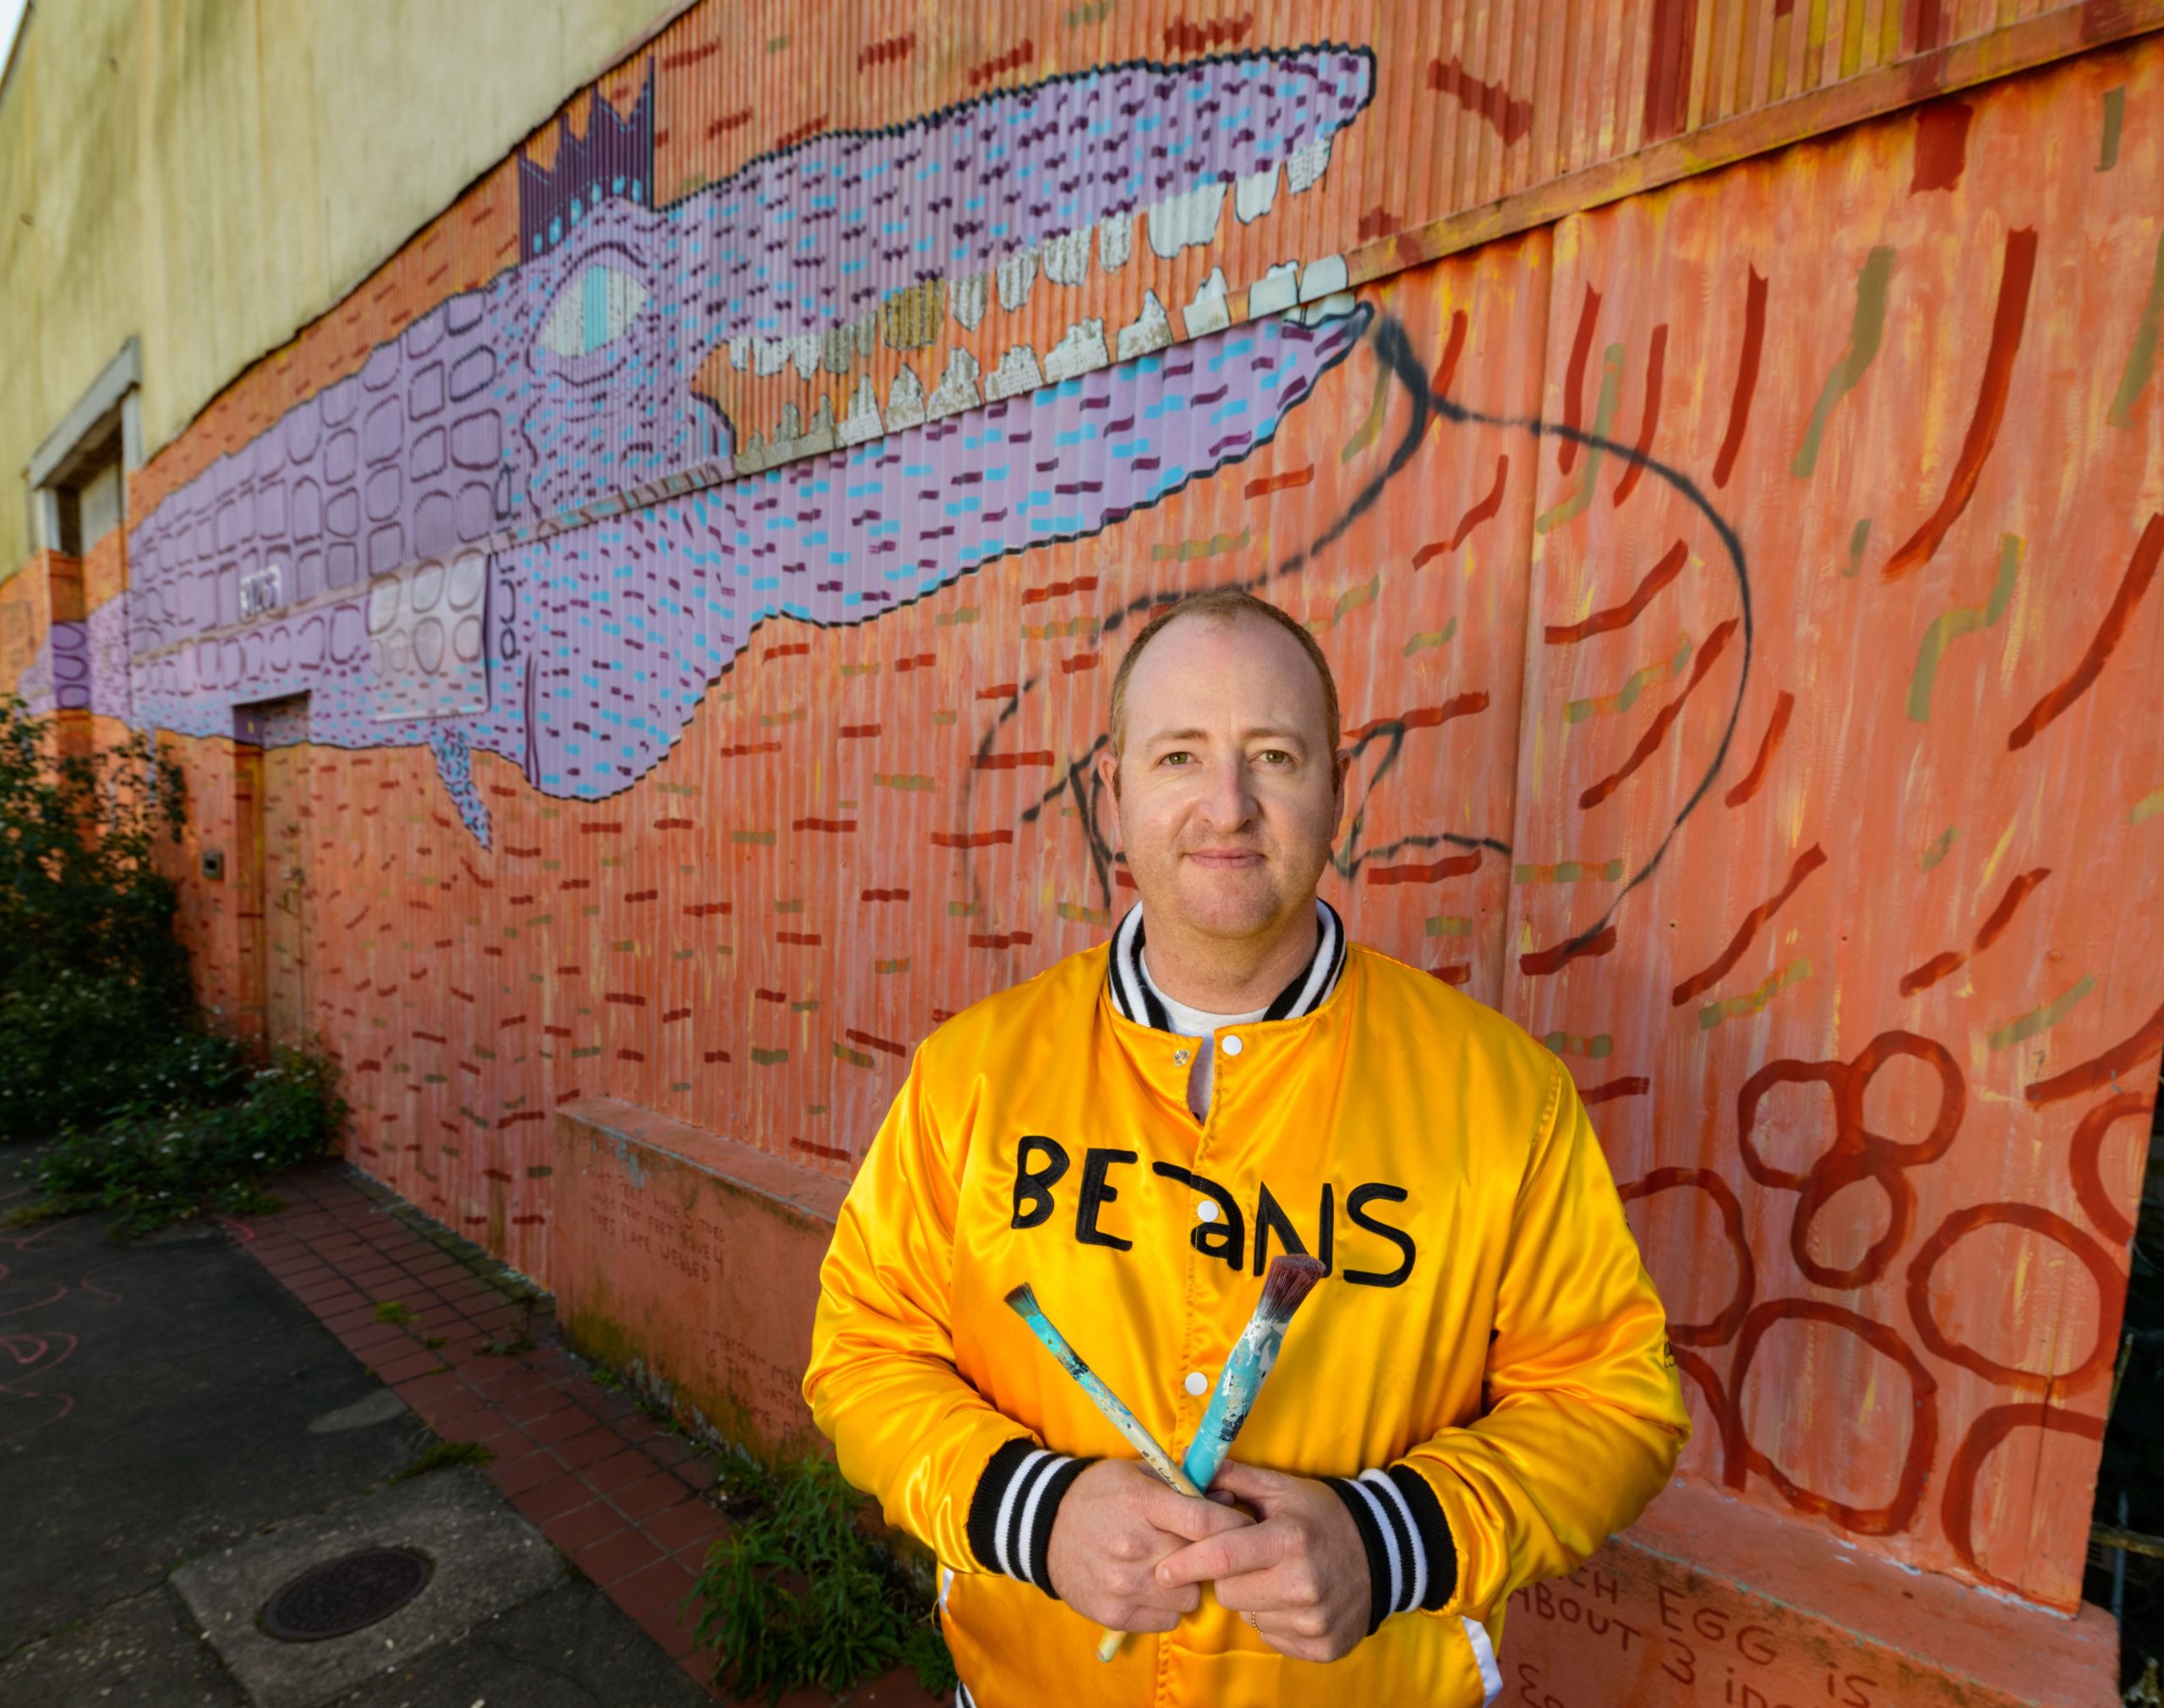 Krewe of Red Beans founder Devin De Wulf likes to find projects that are win-win for his community and creating art like this giant mural called Nnamdi the Gator, that he painted for one of his Bywater neighbors in New Orleans. Photo by Matthew Hinton